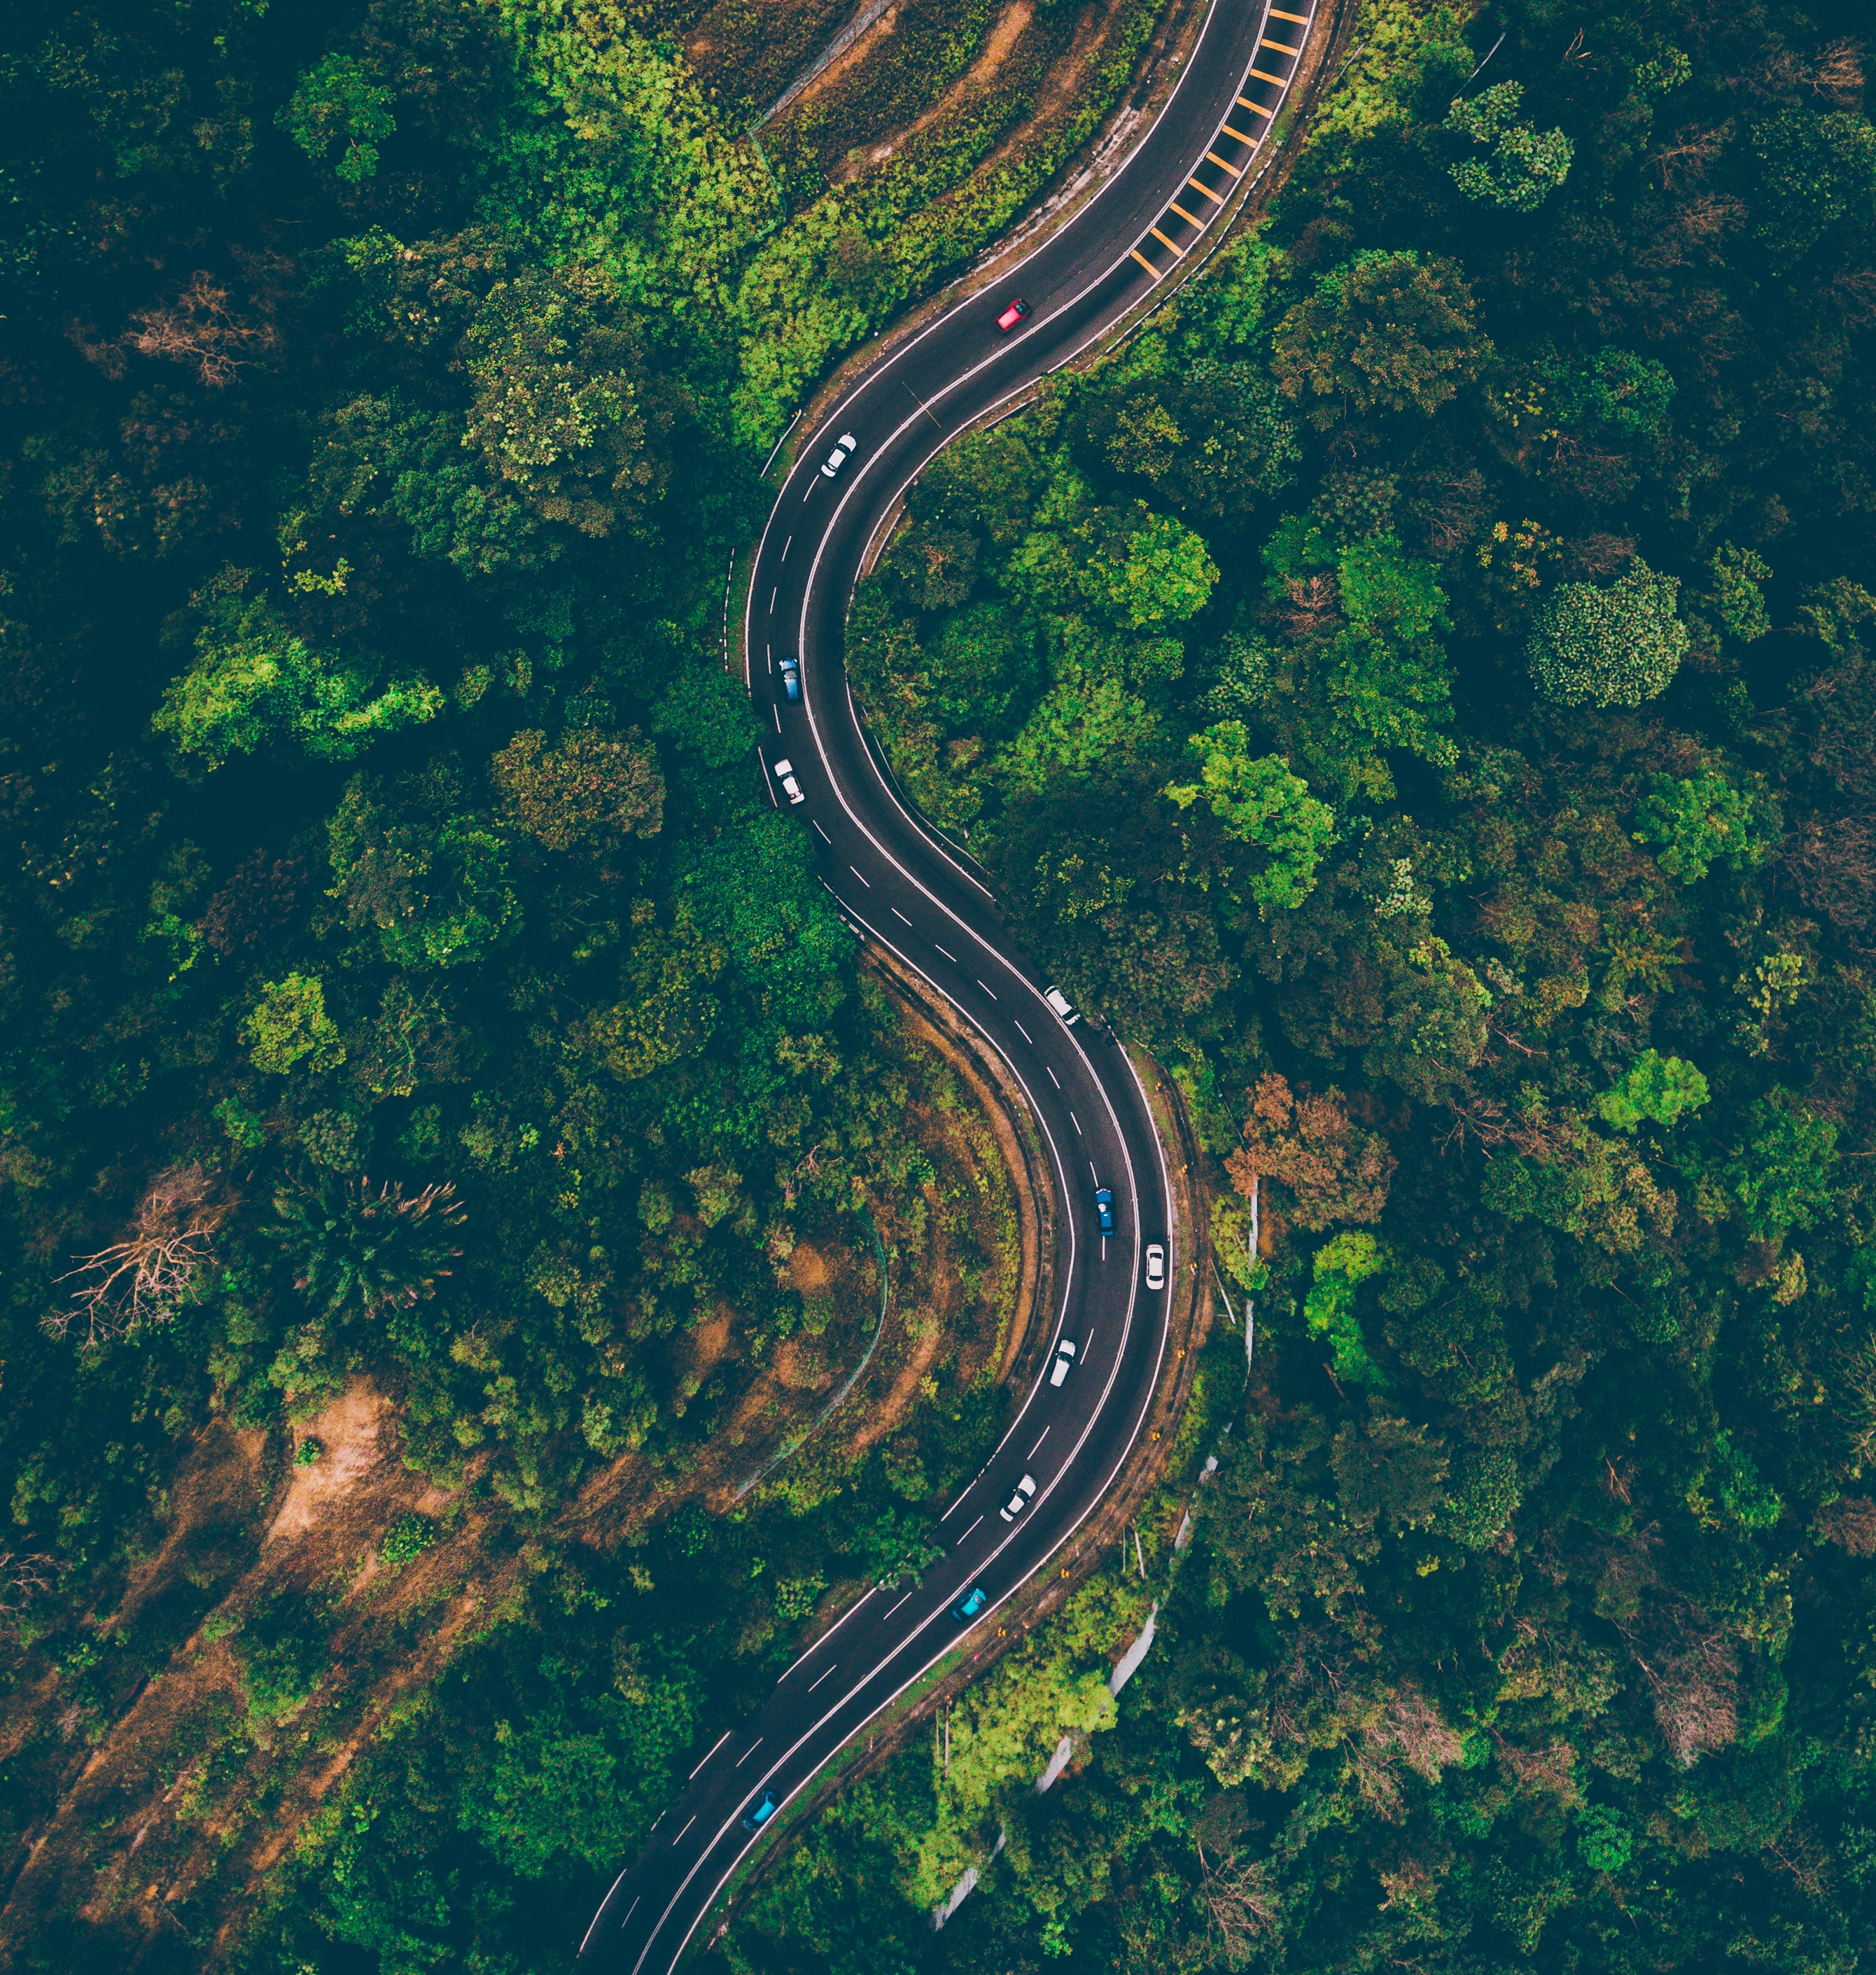 road, sinuous, malaysia, view from above, nature, trees, winding, batang kali Full HD